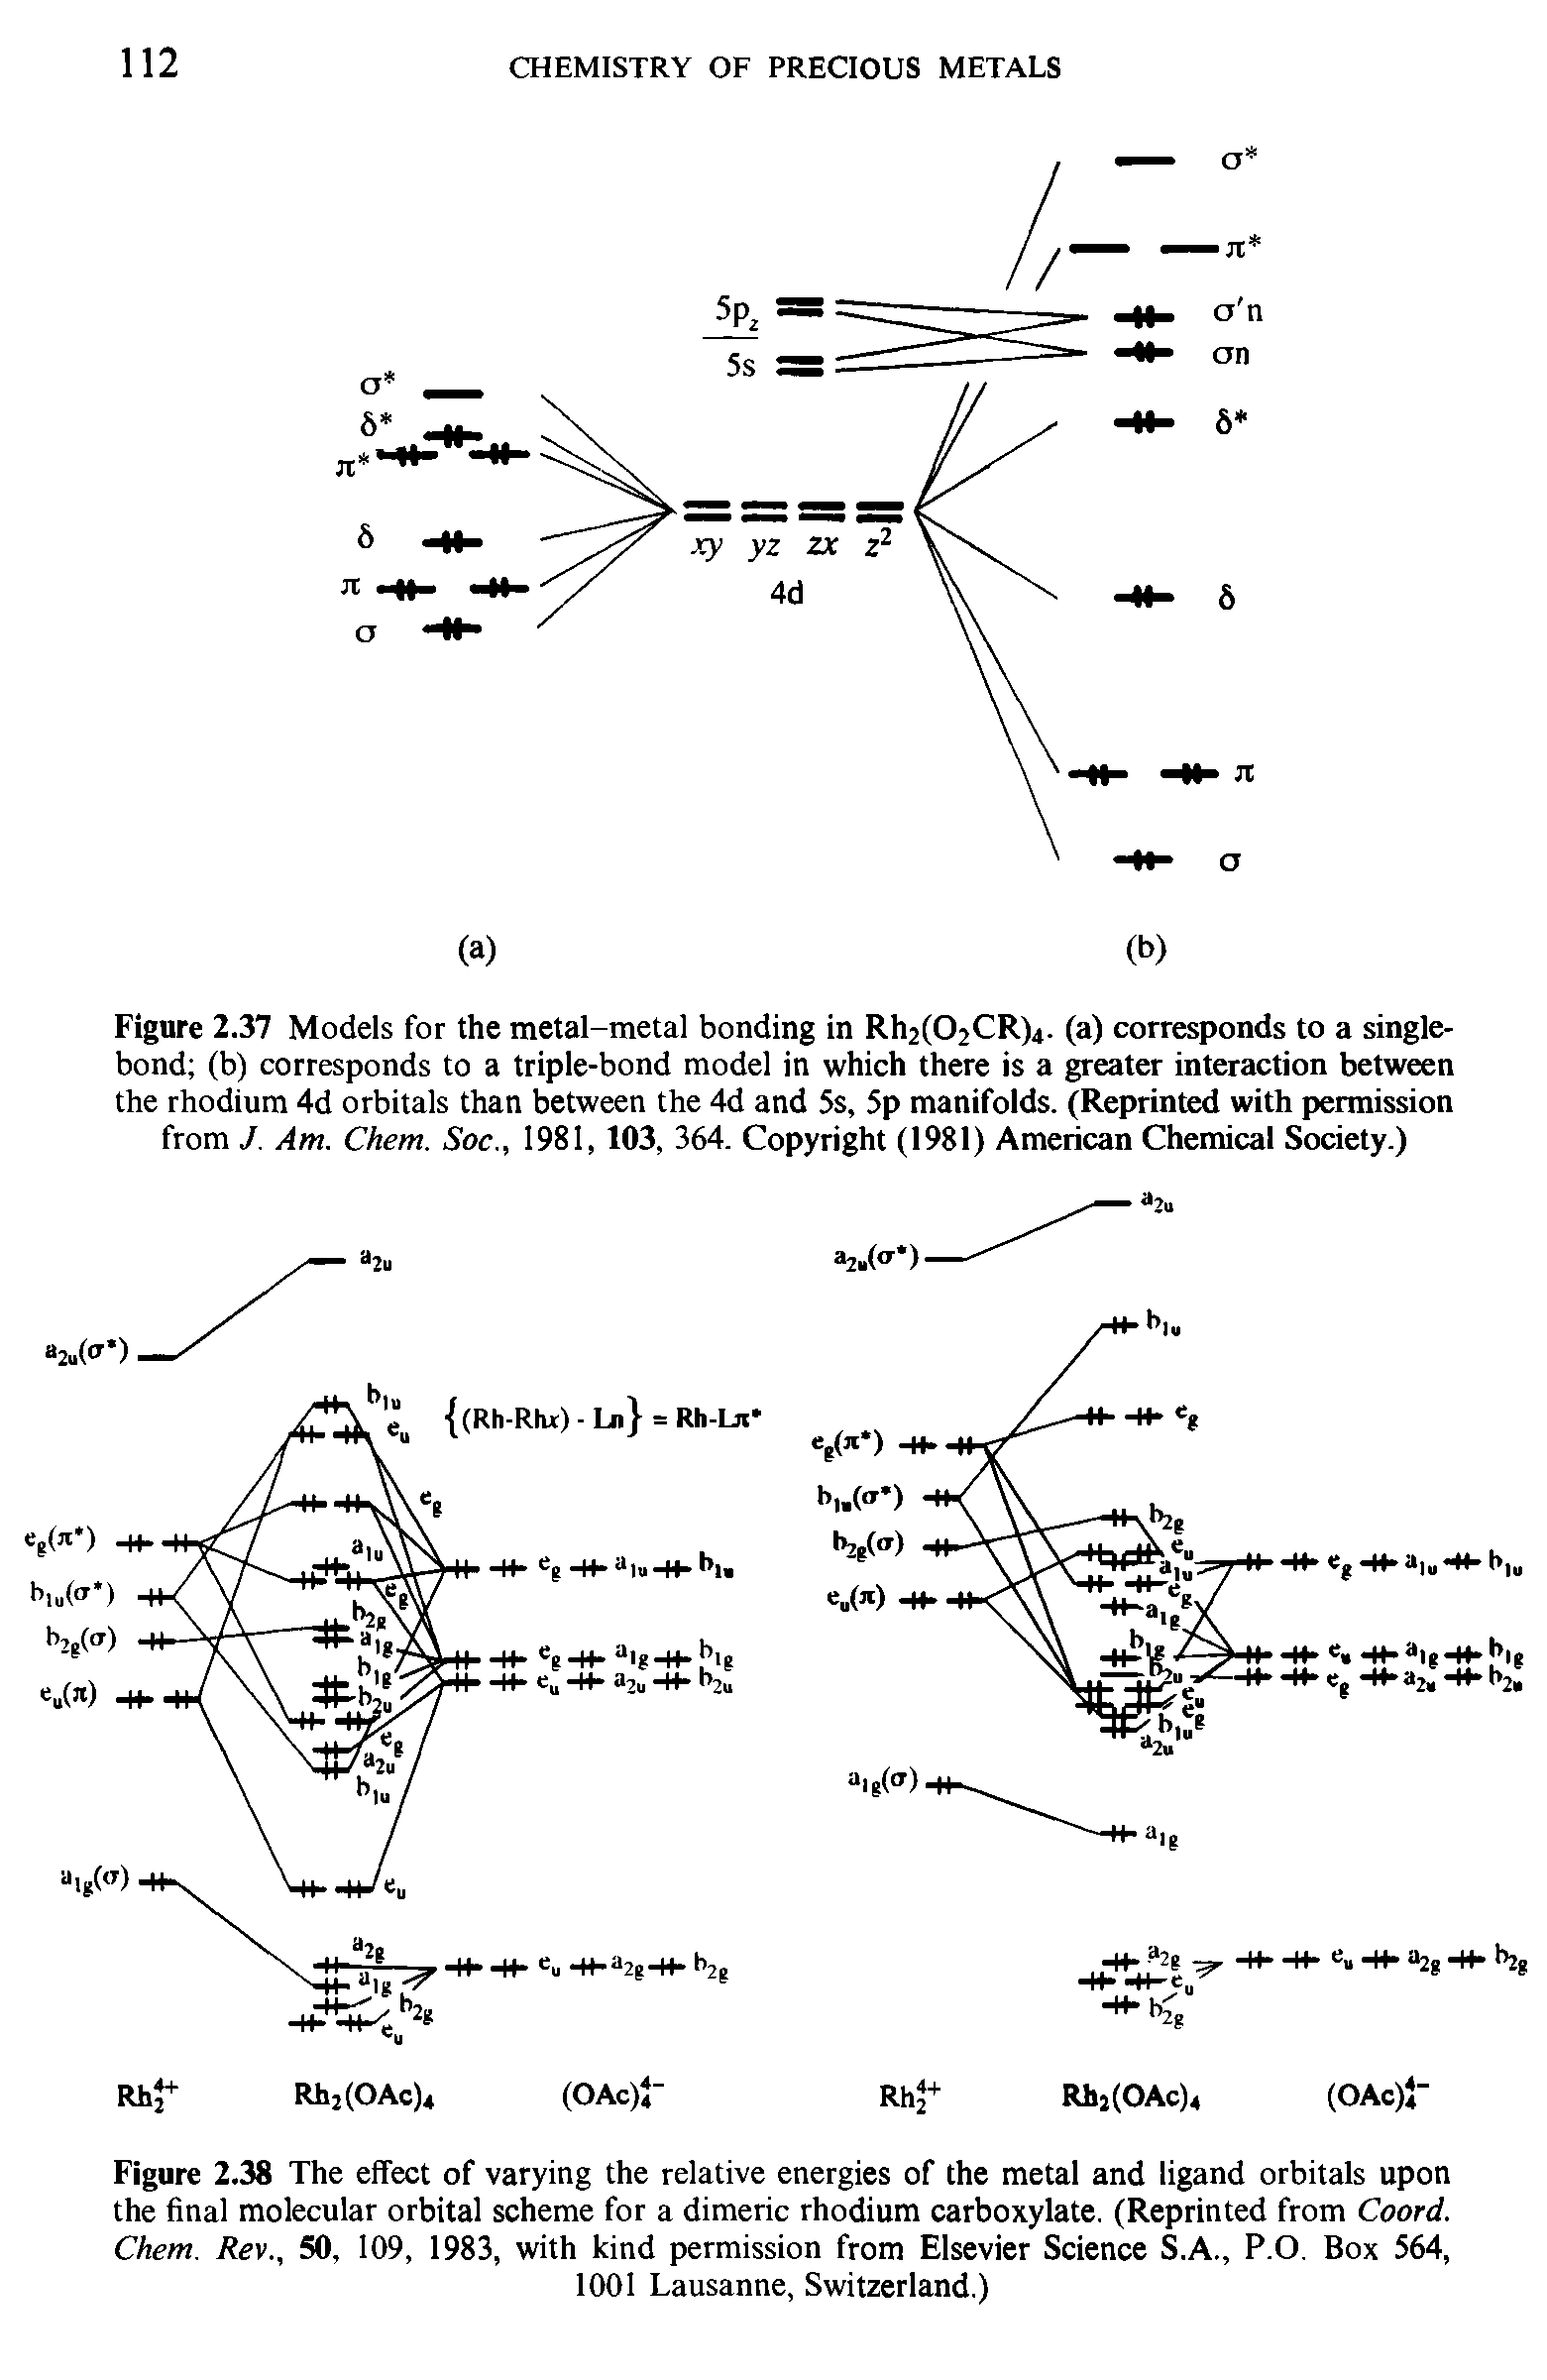 Figure 2.38 The effect of varying the relative energies of the metal and ligand orbitals upon the final molecular orbital scheme for a dimeric rhodium carboxylate. (Reprinted from Coord. Chem. Rev., 50, 109, 1983, with kind permission from Elsevier Science S.A., P.O. Box 564,...